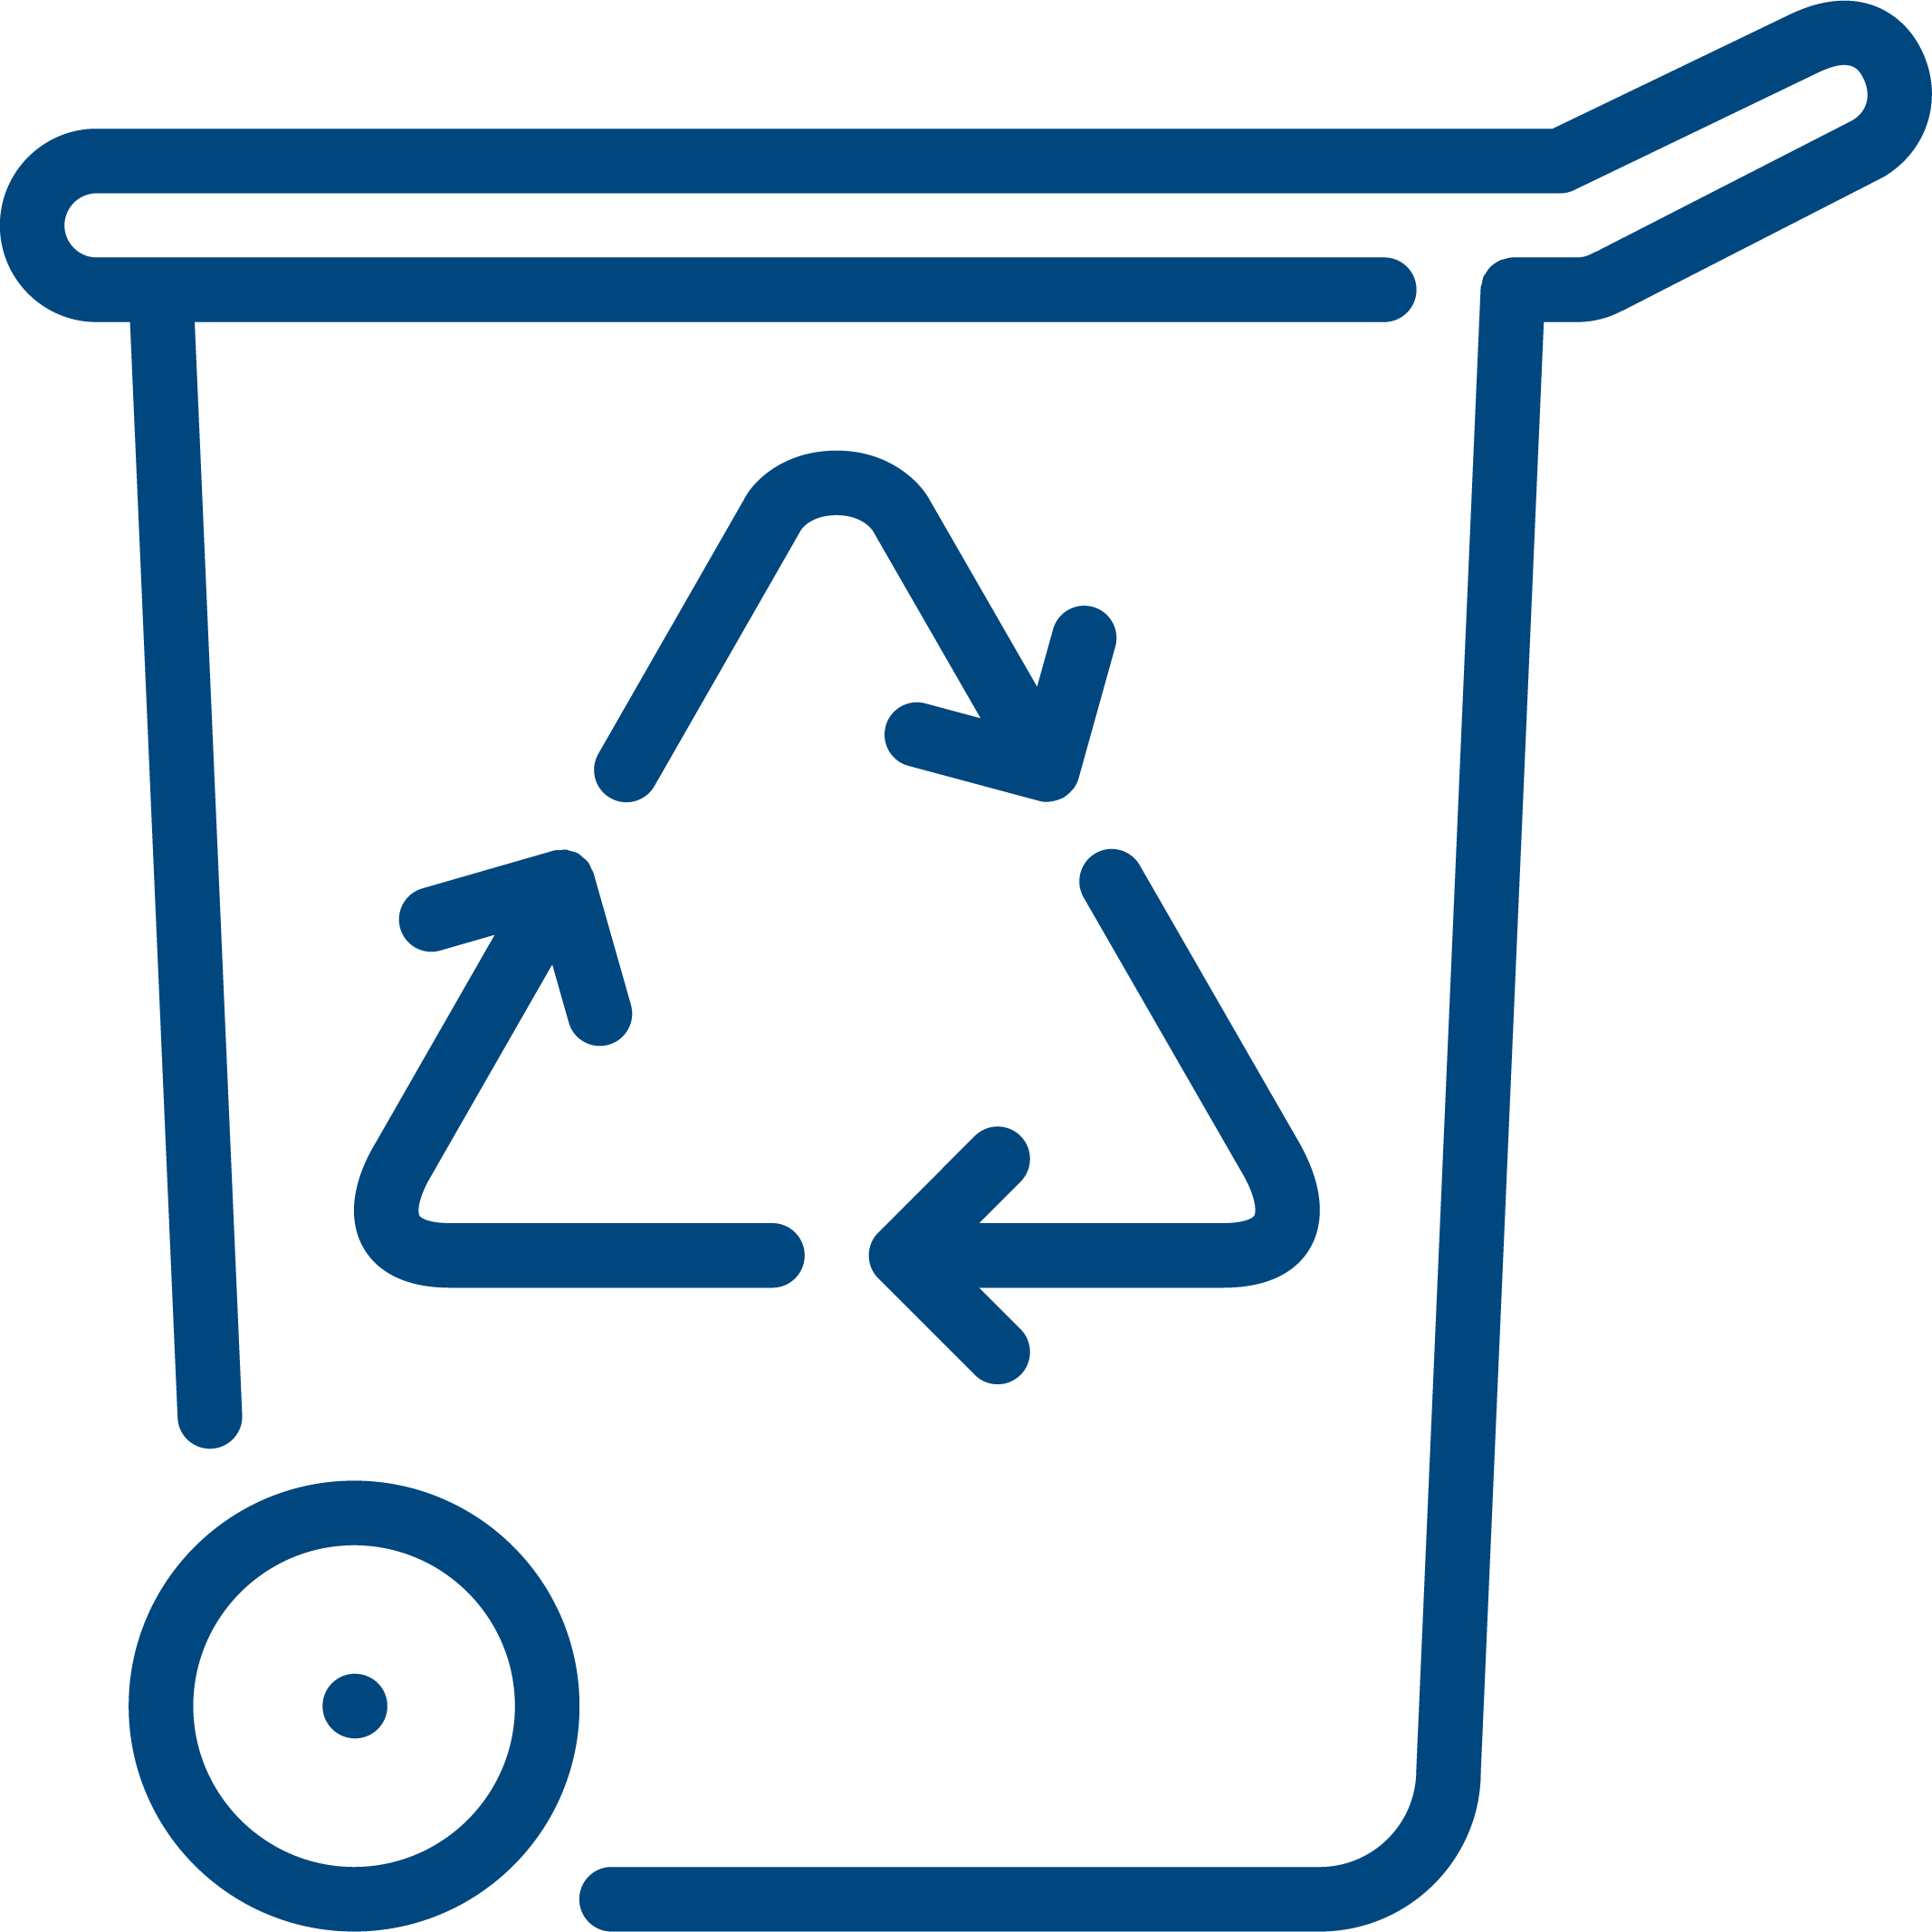 Waste and recycle permits